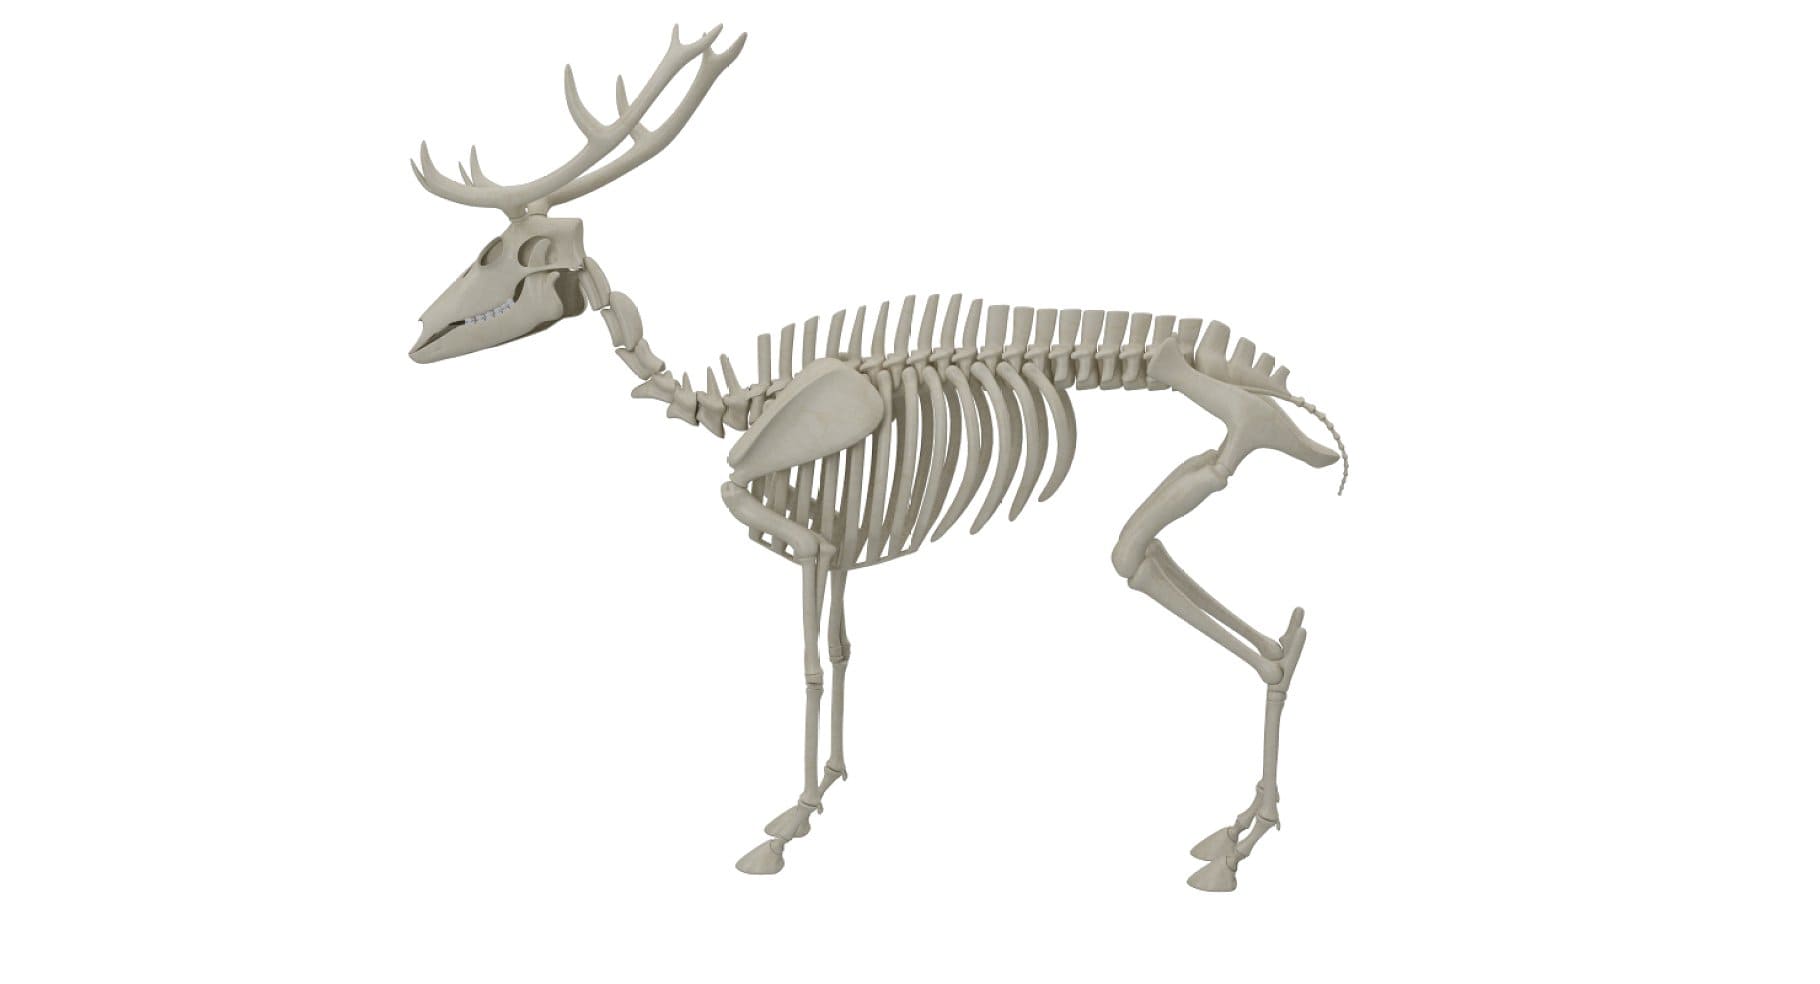 A picture of a deer skeleton with a short tail.